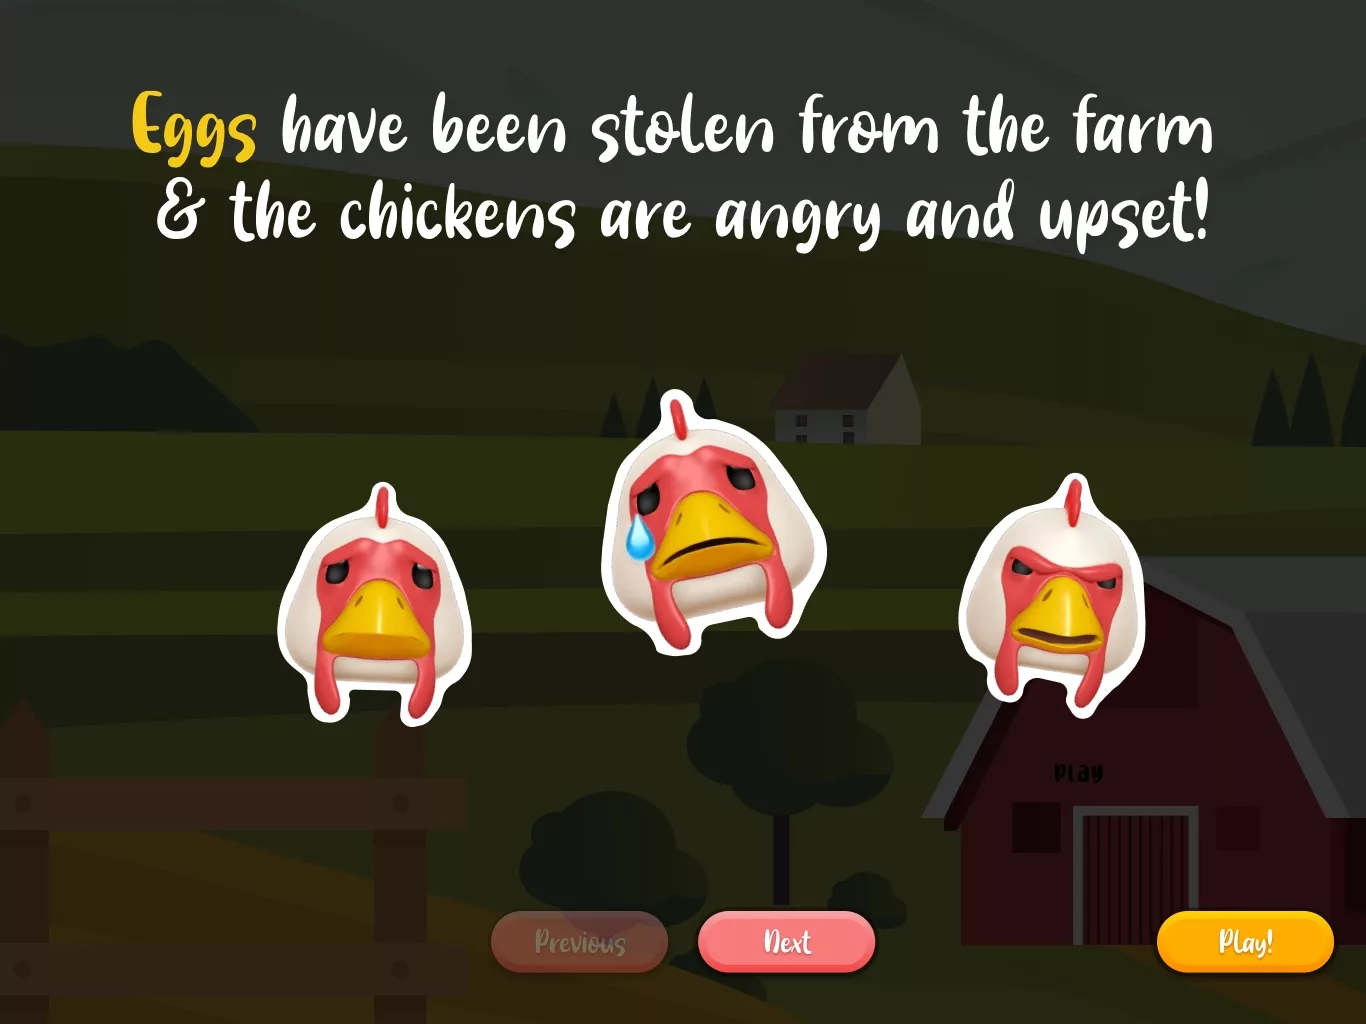 Eggs have been stolen from the farm & the chickens are angry and upset!